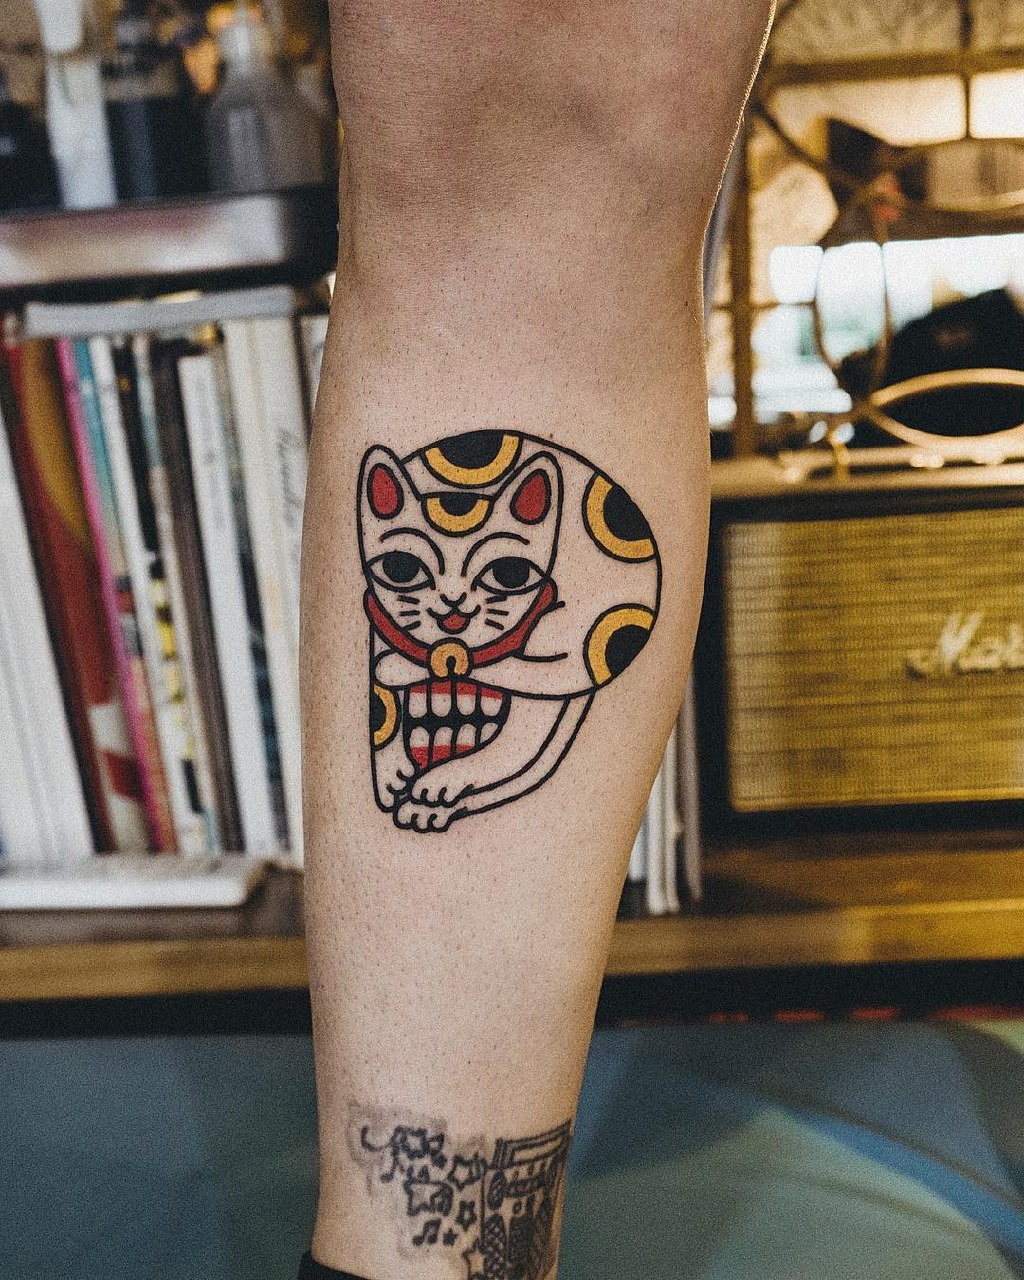 5 Popular Tattoo Designs In Korea, According To A Tattoo Artist | Preview.ph